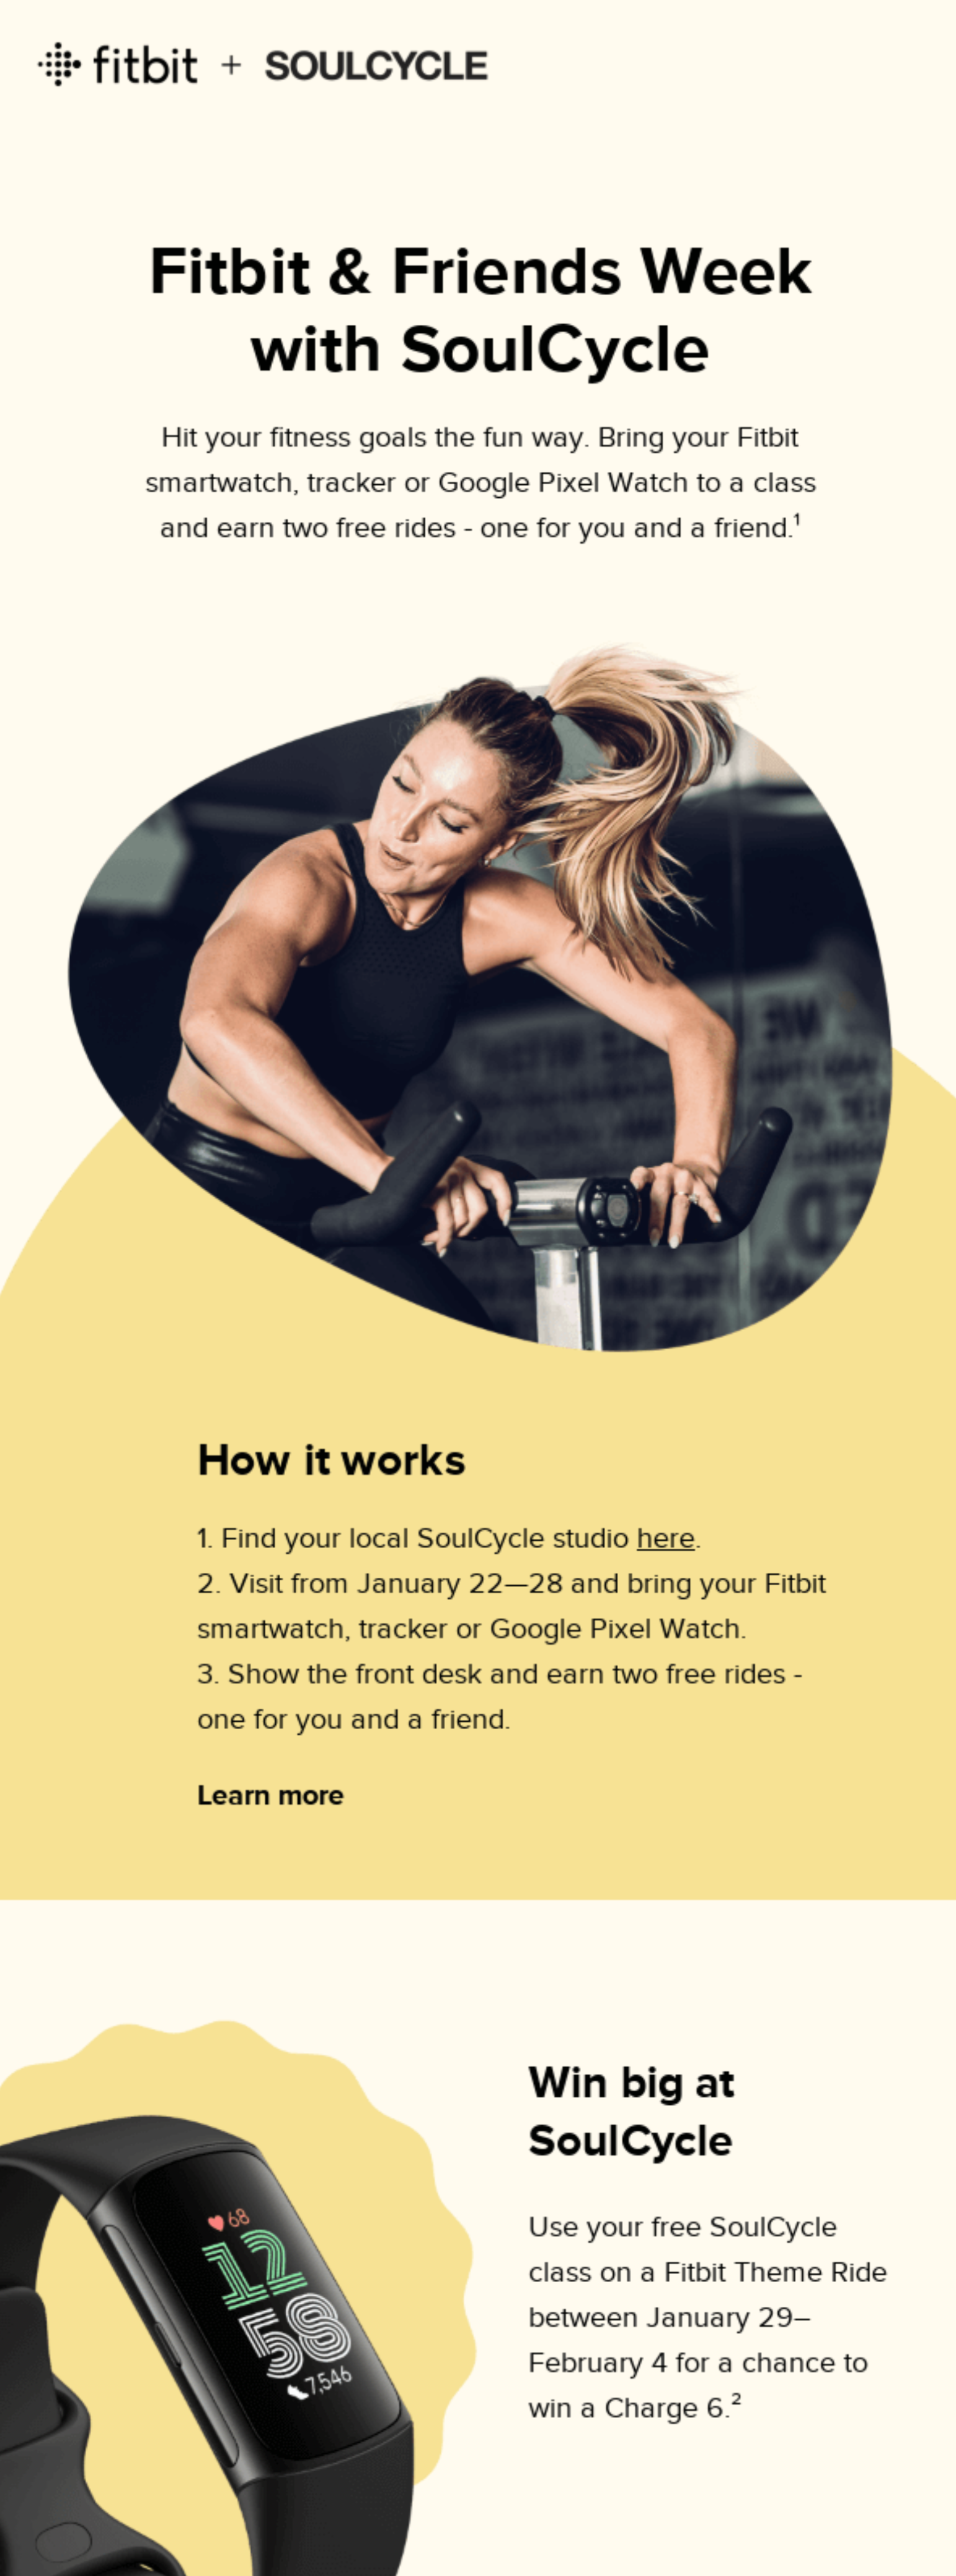 A long email featuring a photo of a woman on a spin bike. The photo is cropped in almost a rounded triangle shape and the woman's ponytail is coming out of the outline of the photo.